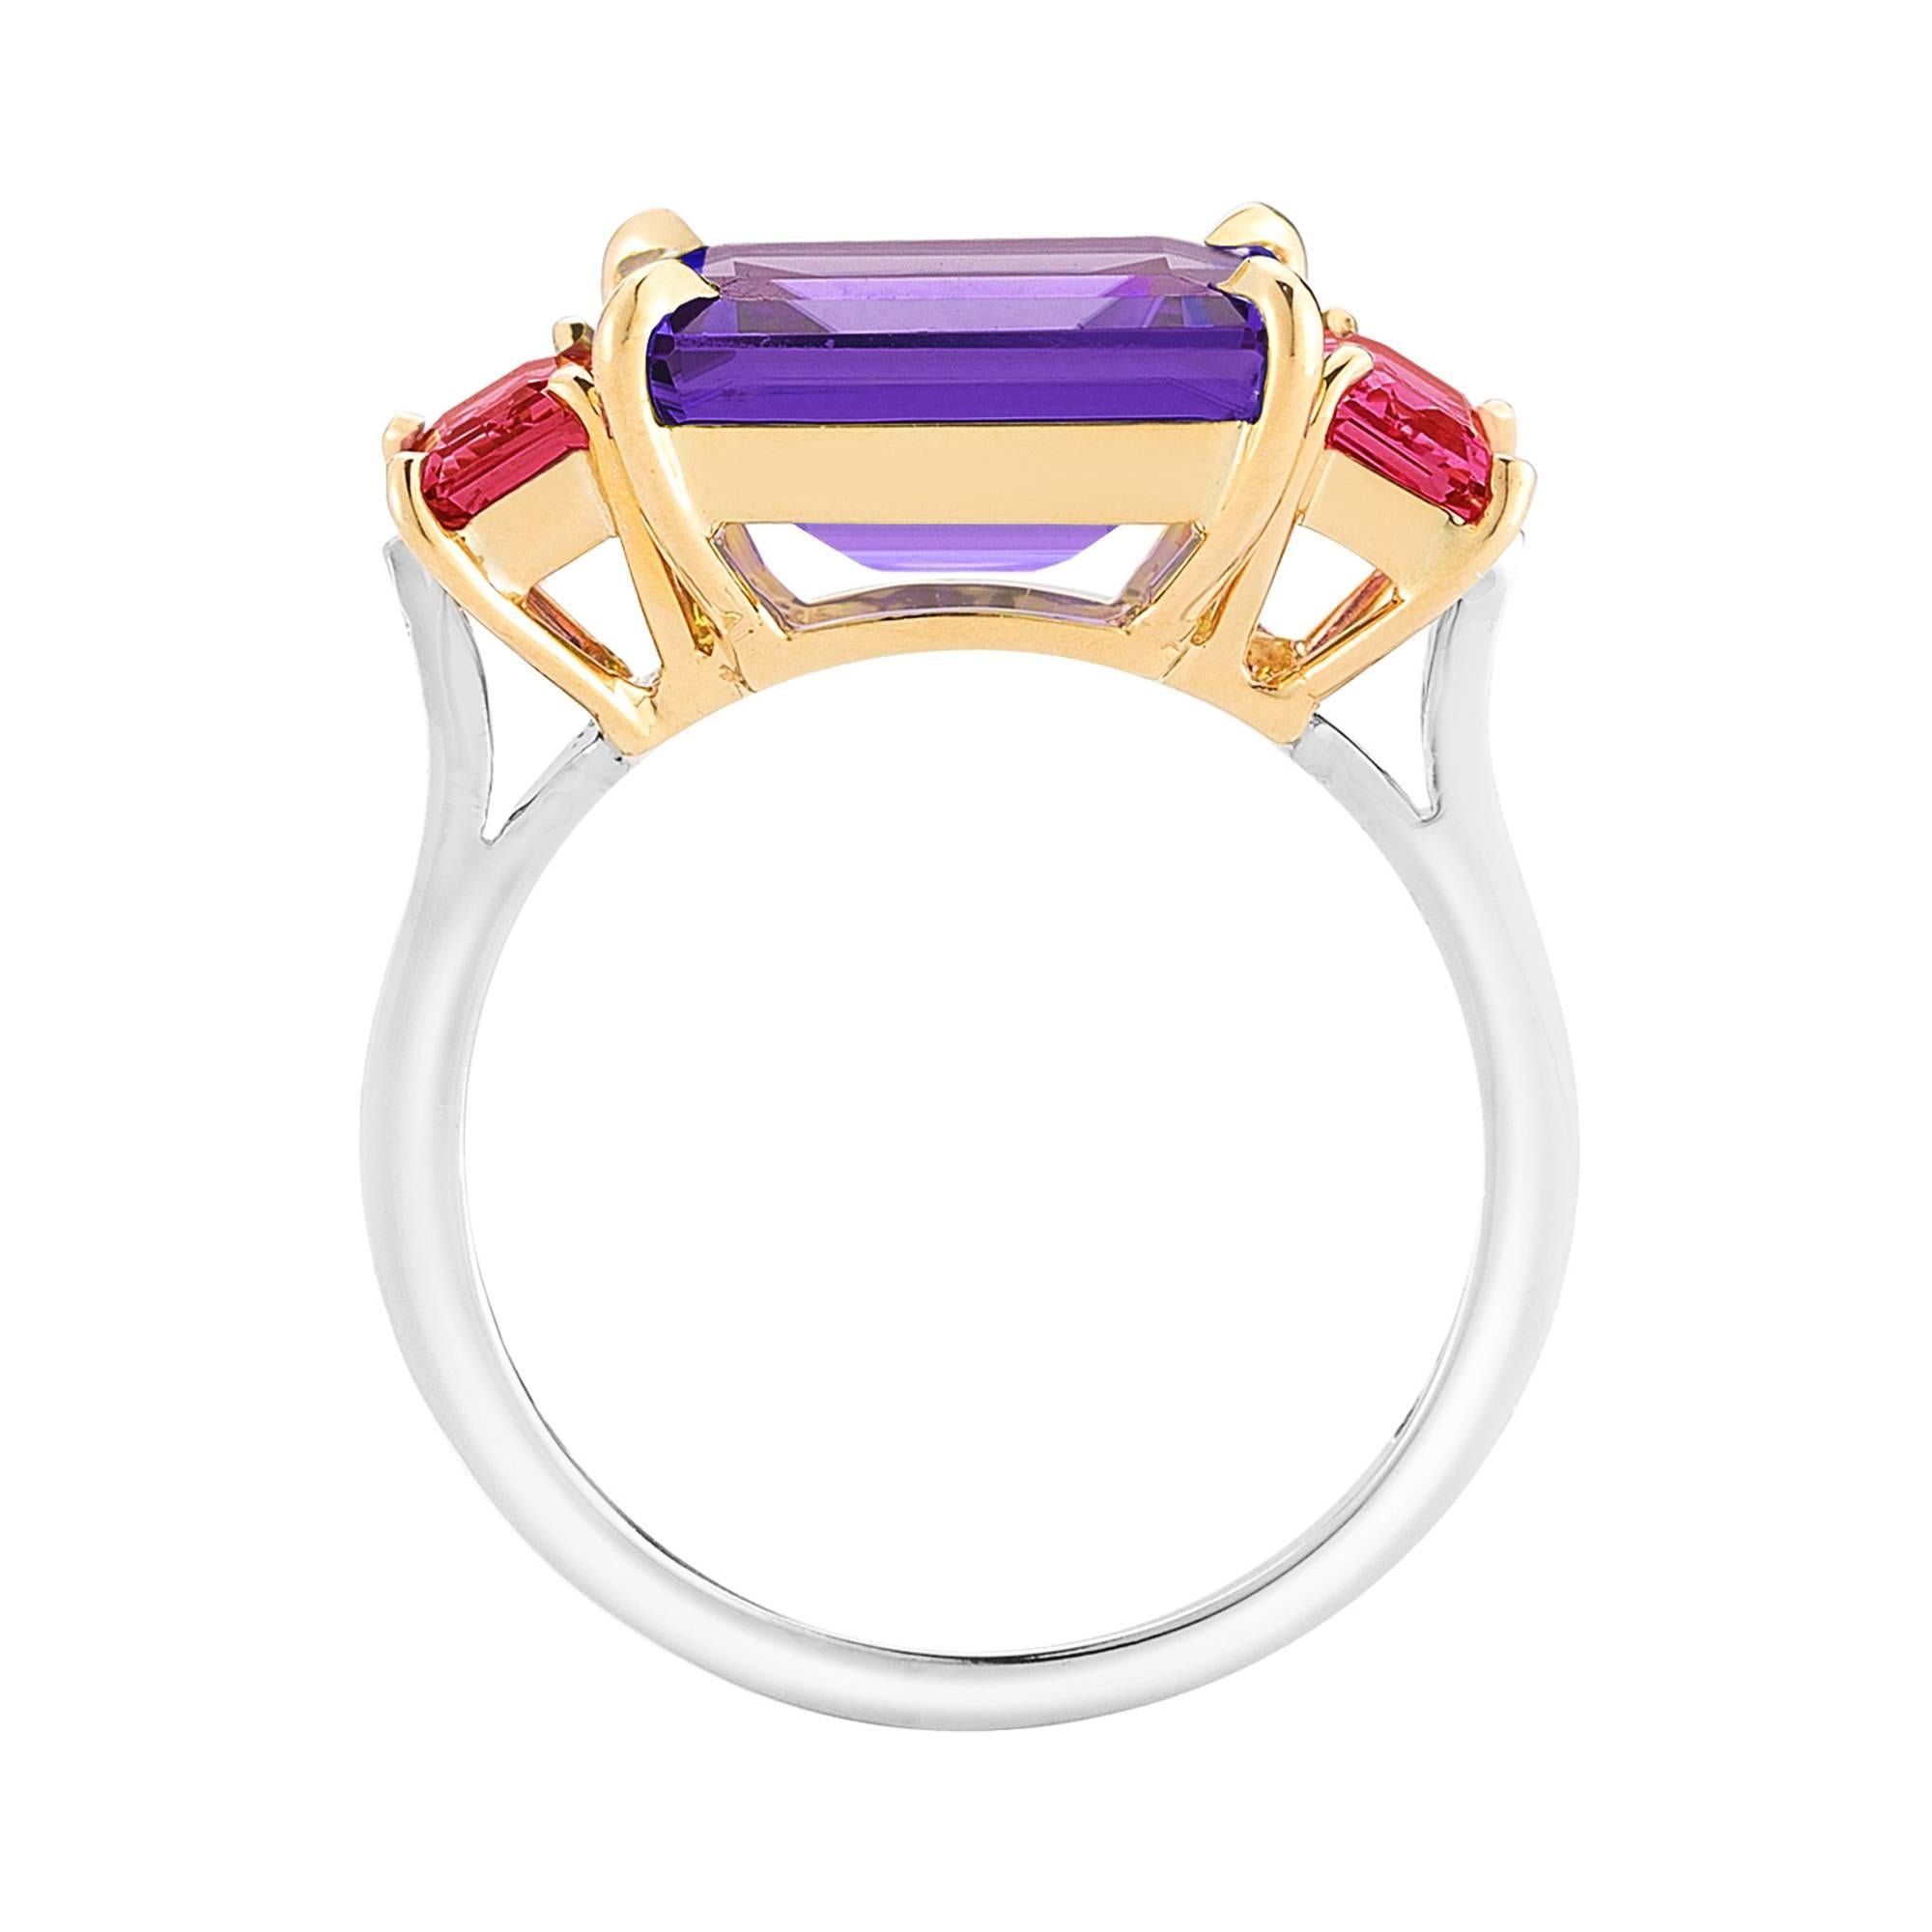 The signature Paolo Costagli three-stone Florentine ring set in 18kt yellow and white gold with an emerald-cut amethyst, 6.00 carats flanked by emerald-cut rubies, 1.36 carats and diamond detail, 0.16 carats.

Inspired by the Garden of the Iris, the